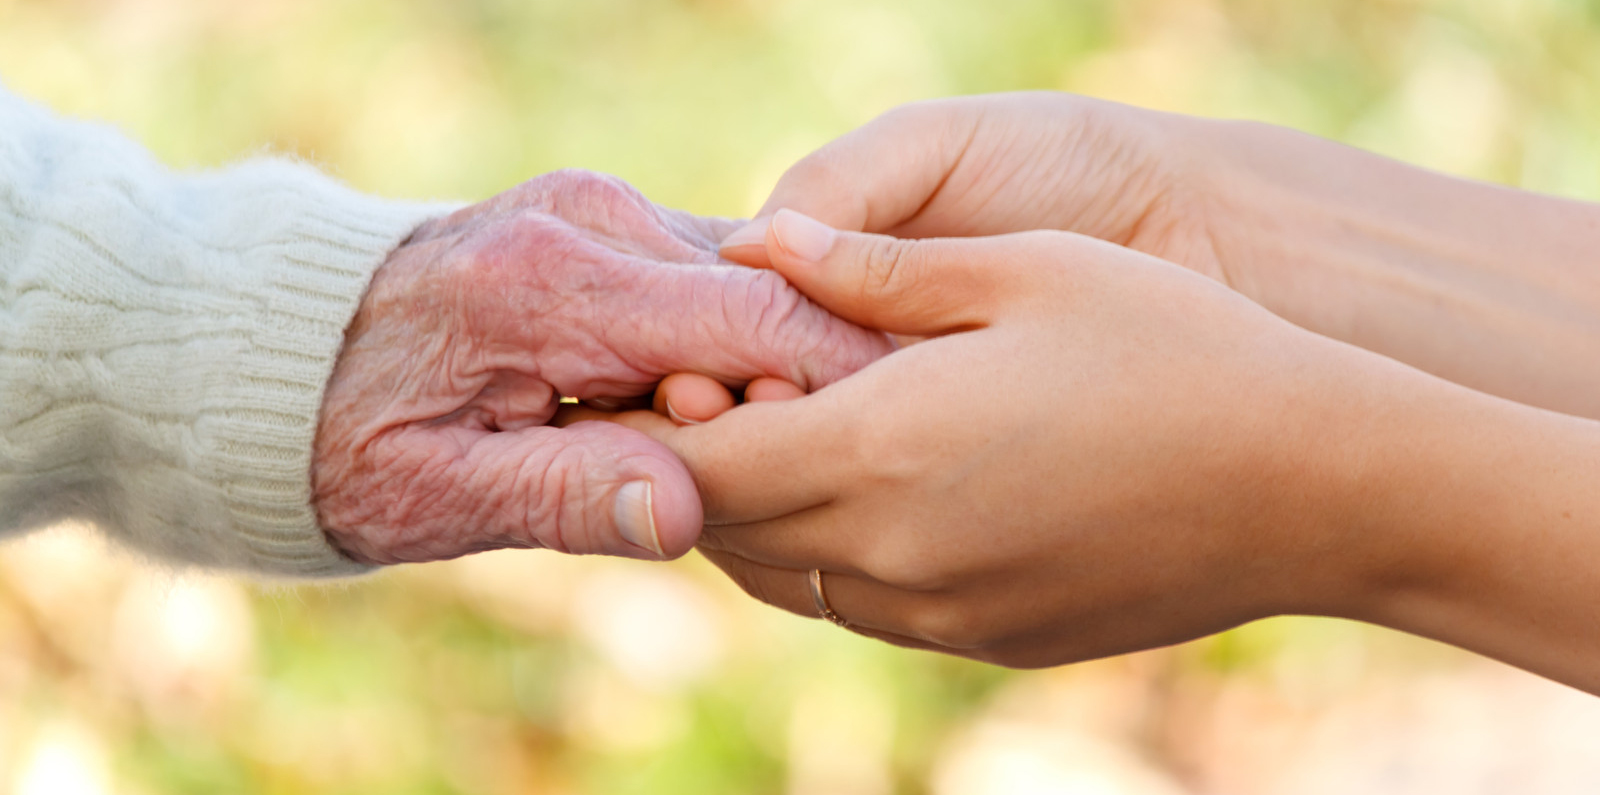 Public Relations In The Care Home Industry